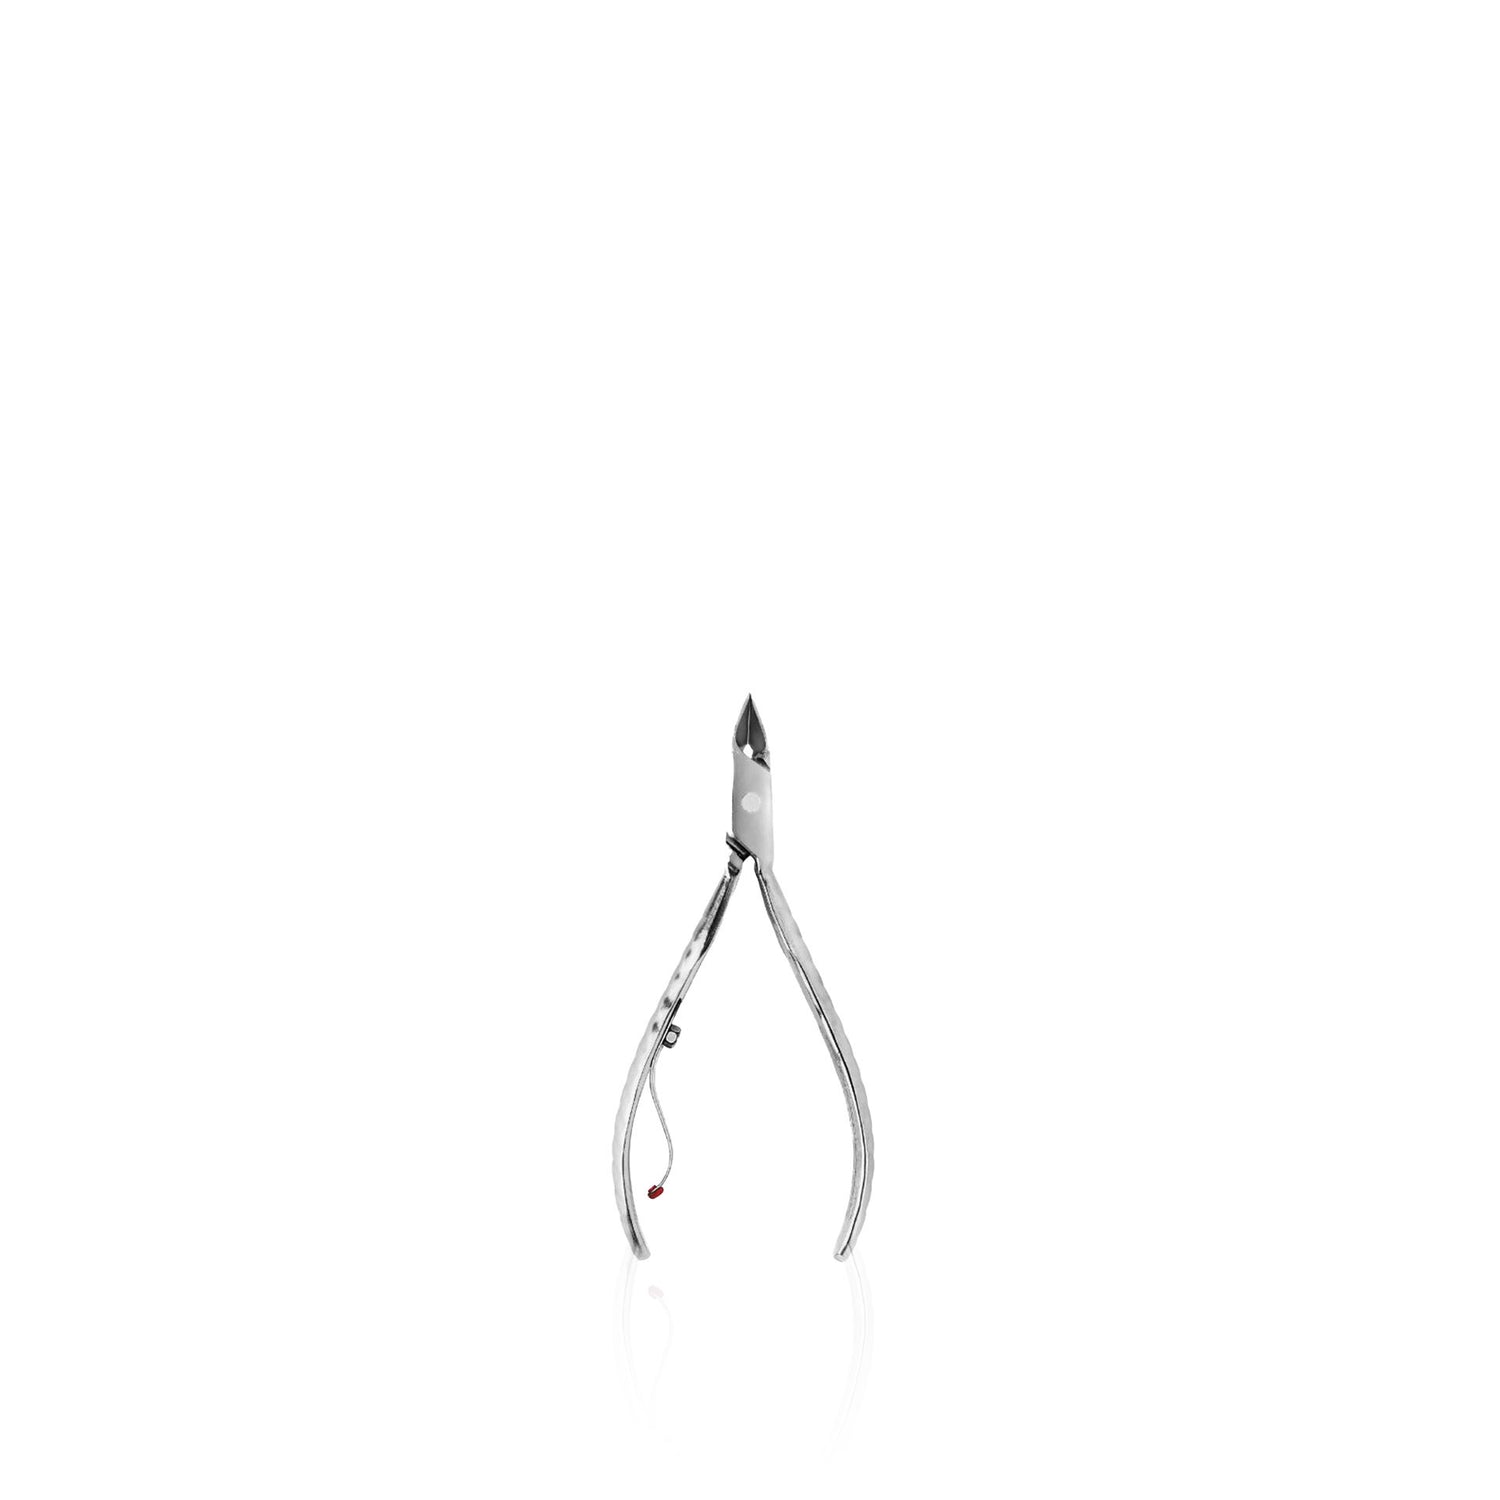 World Cuticle Pliers 722 Stainless 10 Cm